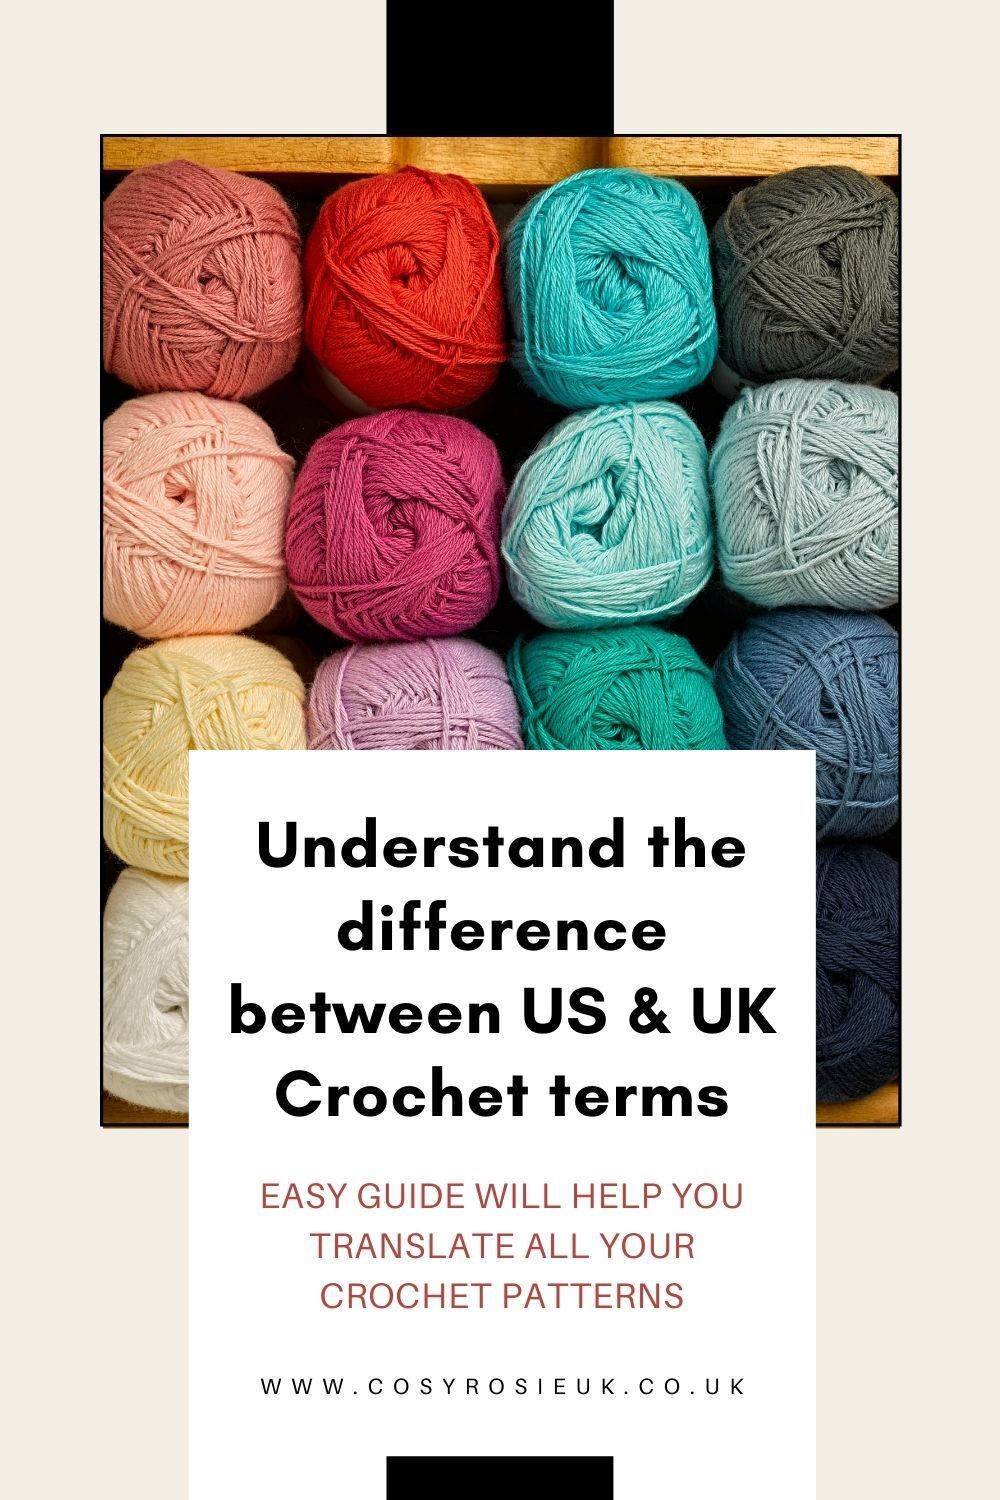 Understand the difference between US & UK crochet terms